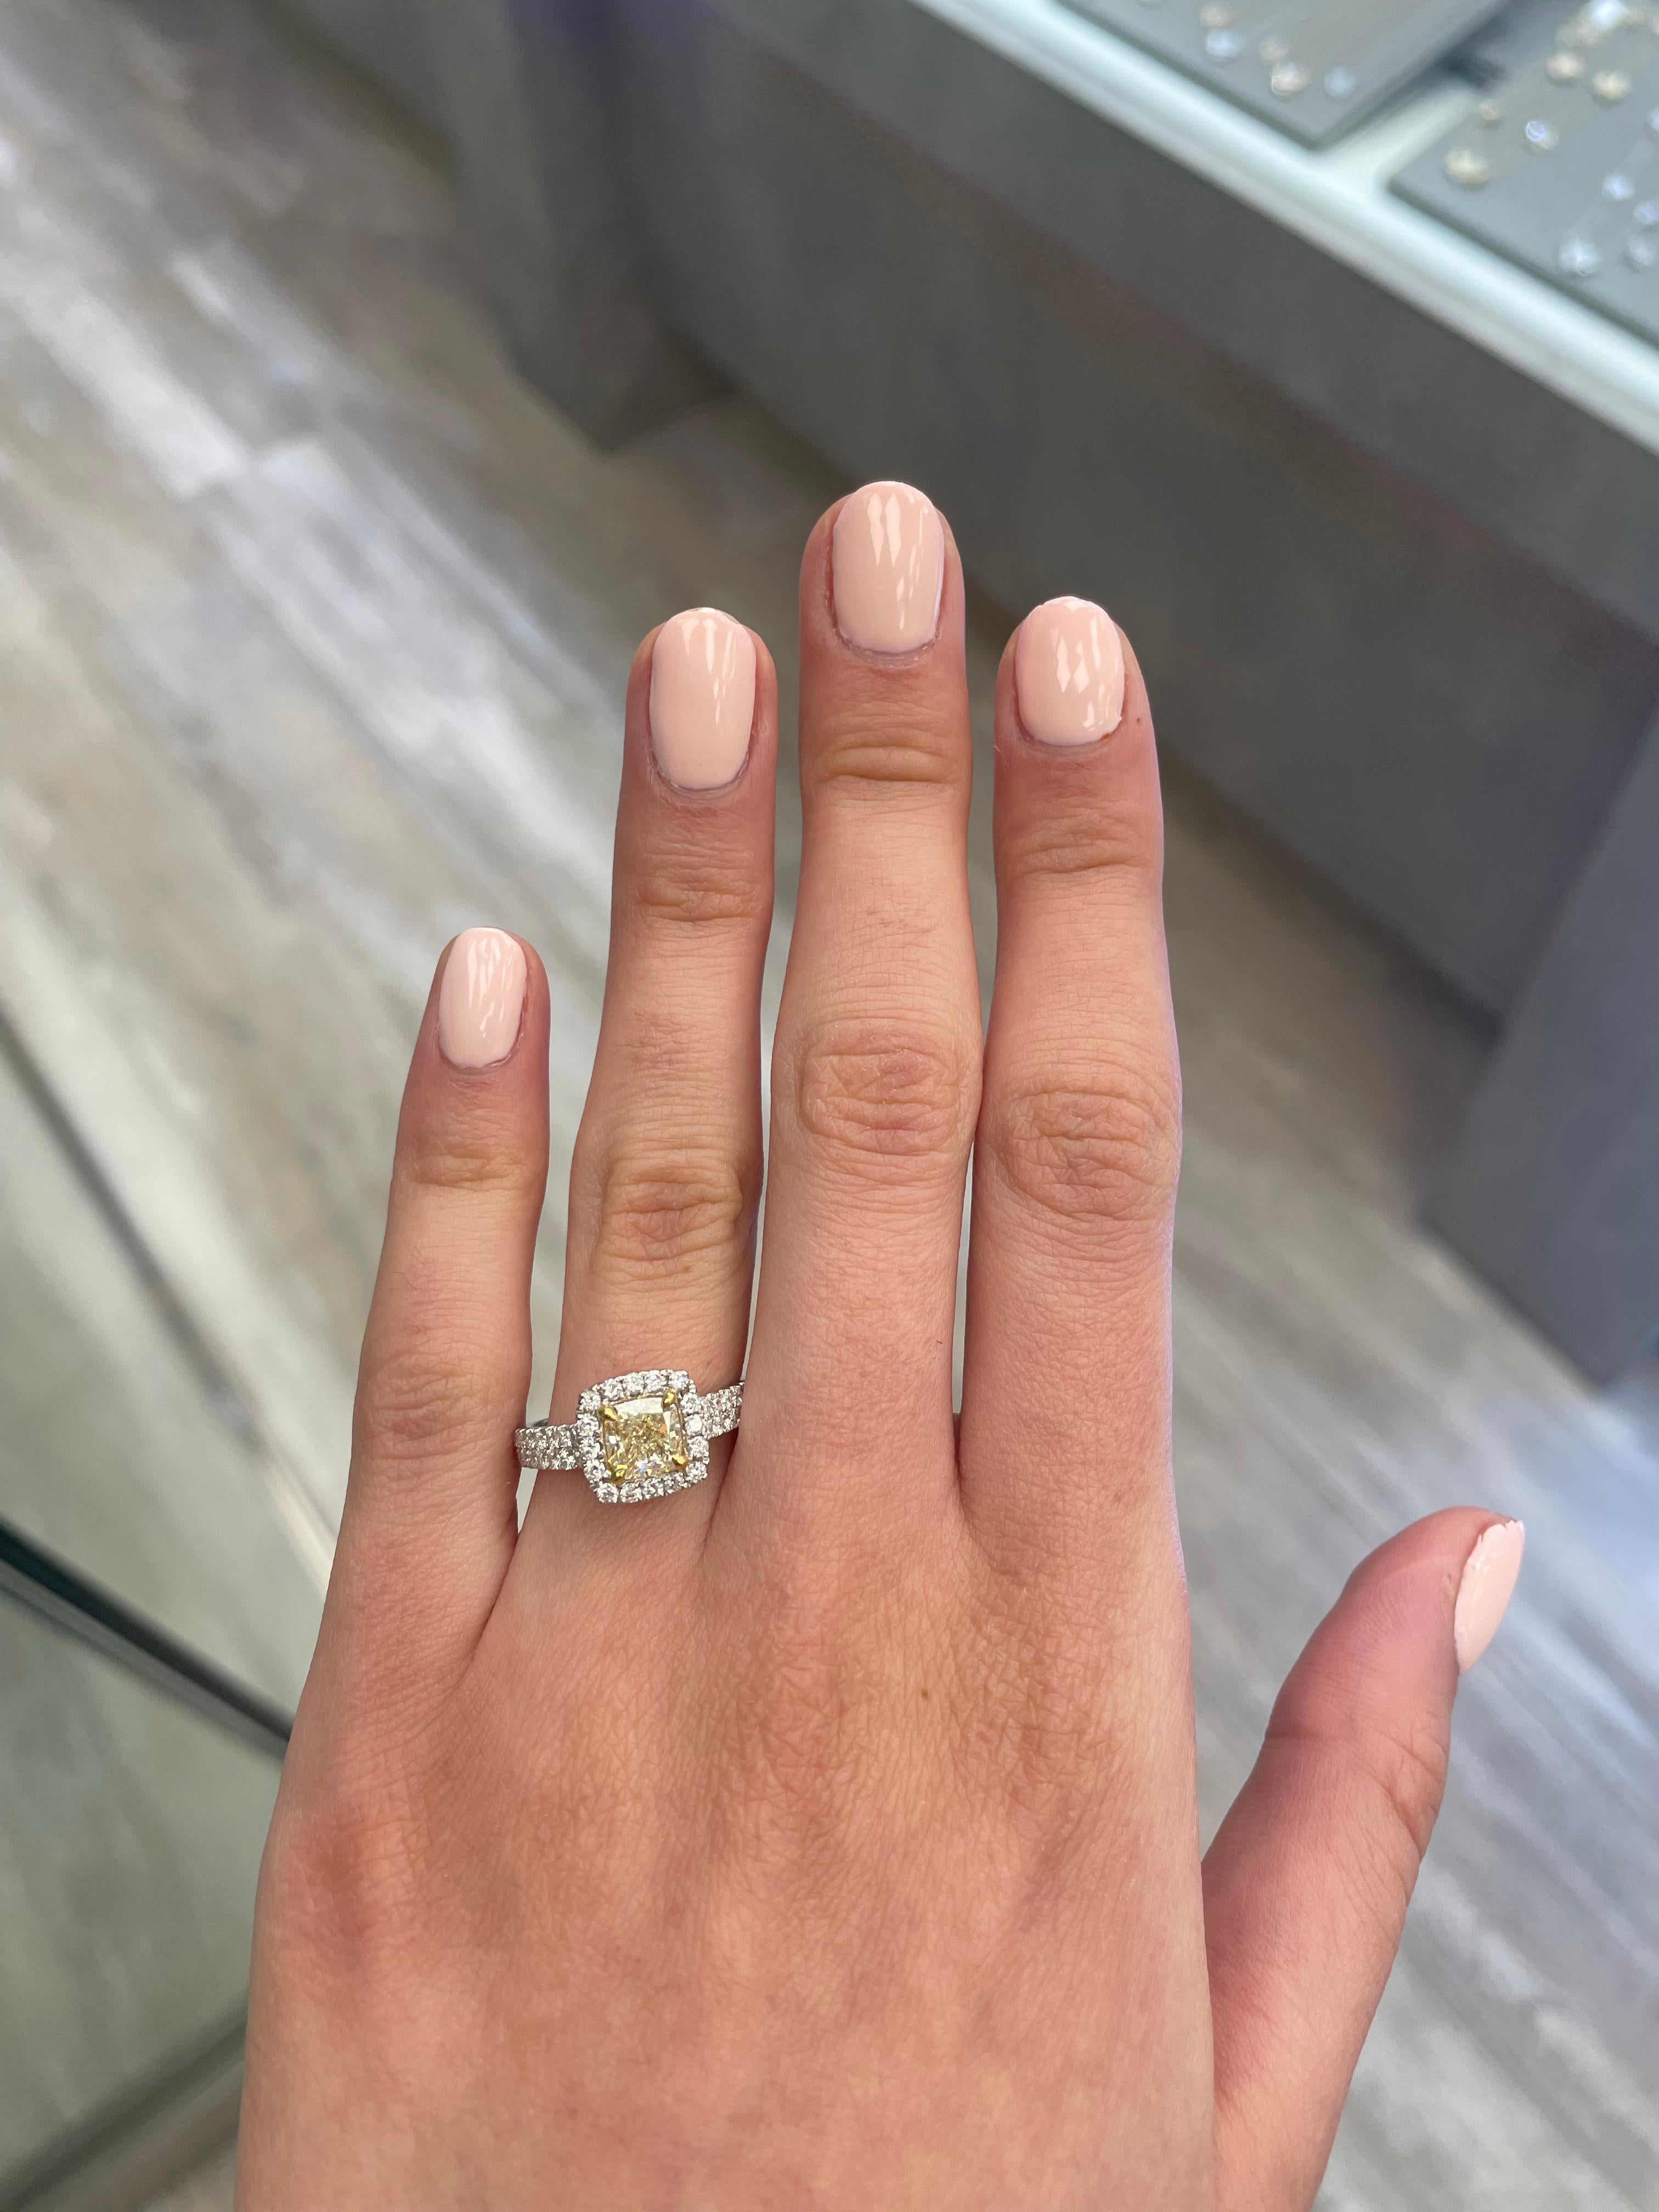 Stunning modern EGL certified yellow diamond with halo ring, two-tone 18k yellow and white gold. By Alexander Beverly Hills
1.90 carats total diamond weight.
1.21 carat cushion cut Fancy Yellow color and VS1 clarity diamond, EGL graded. Complimented